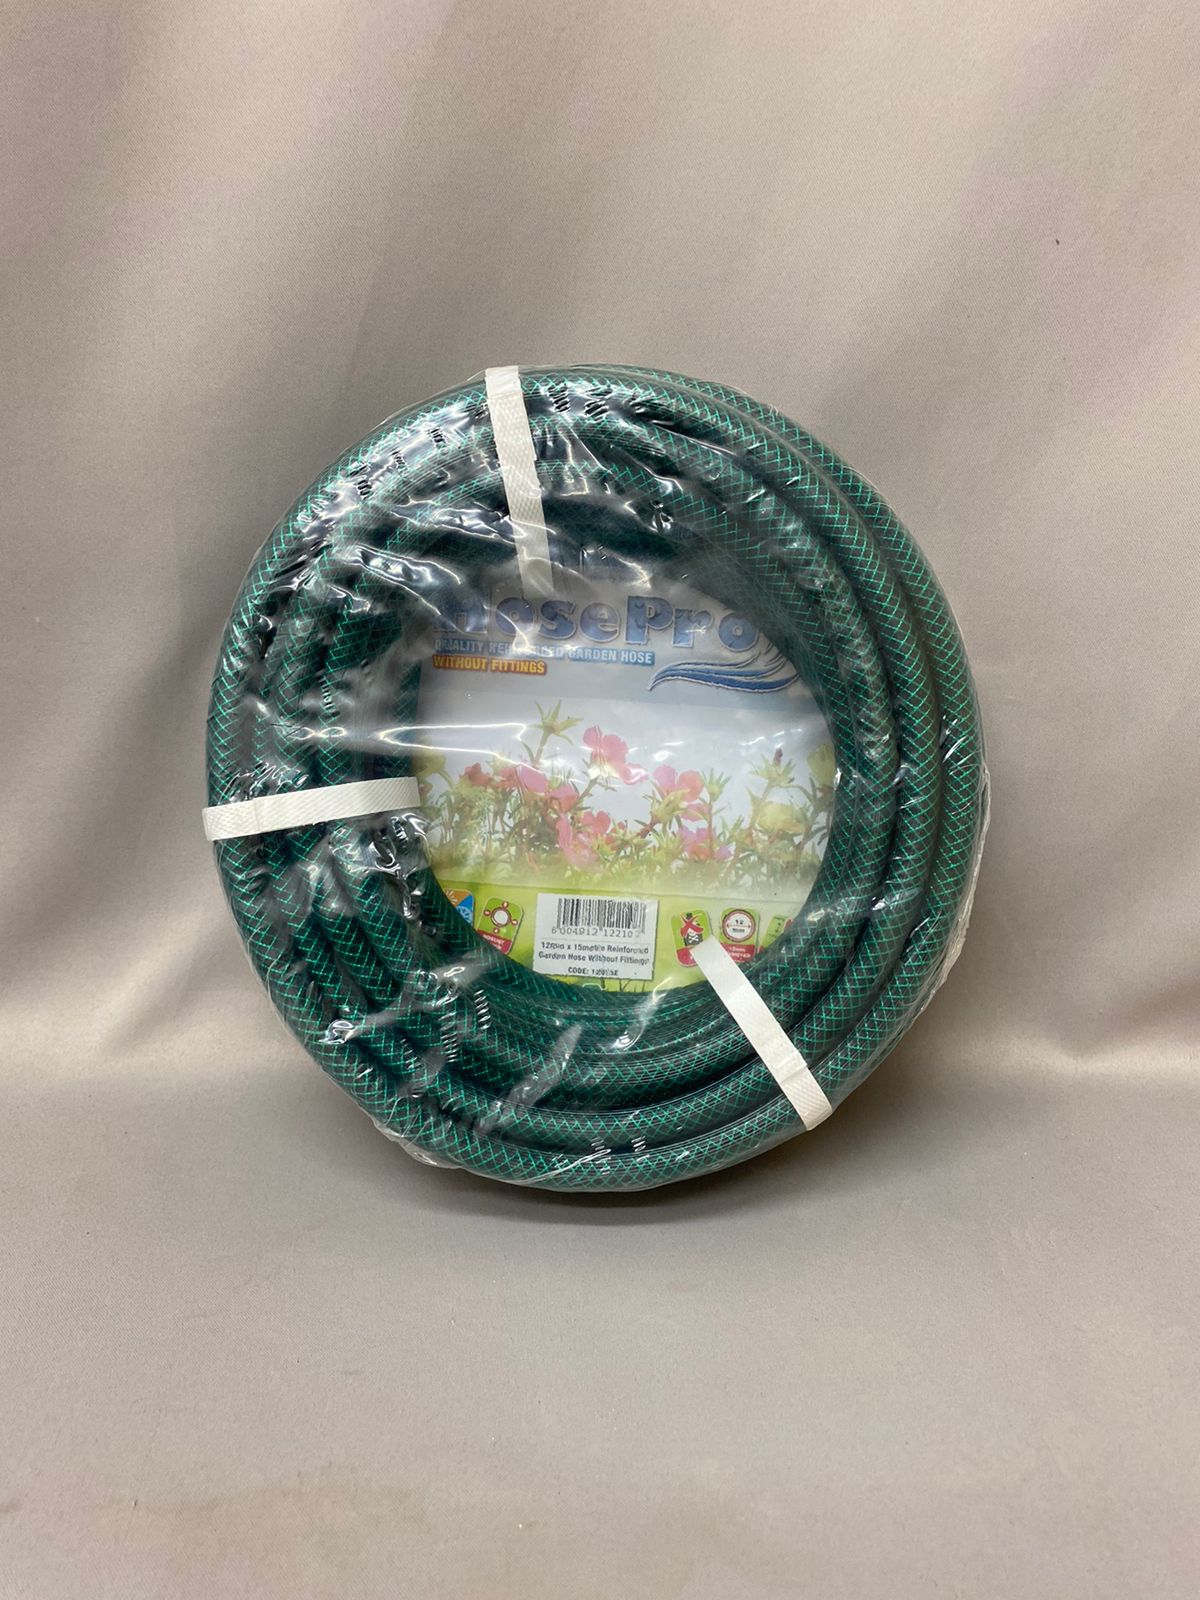 A green garden hose wrapped in plastic packaging against a plain background.